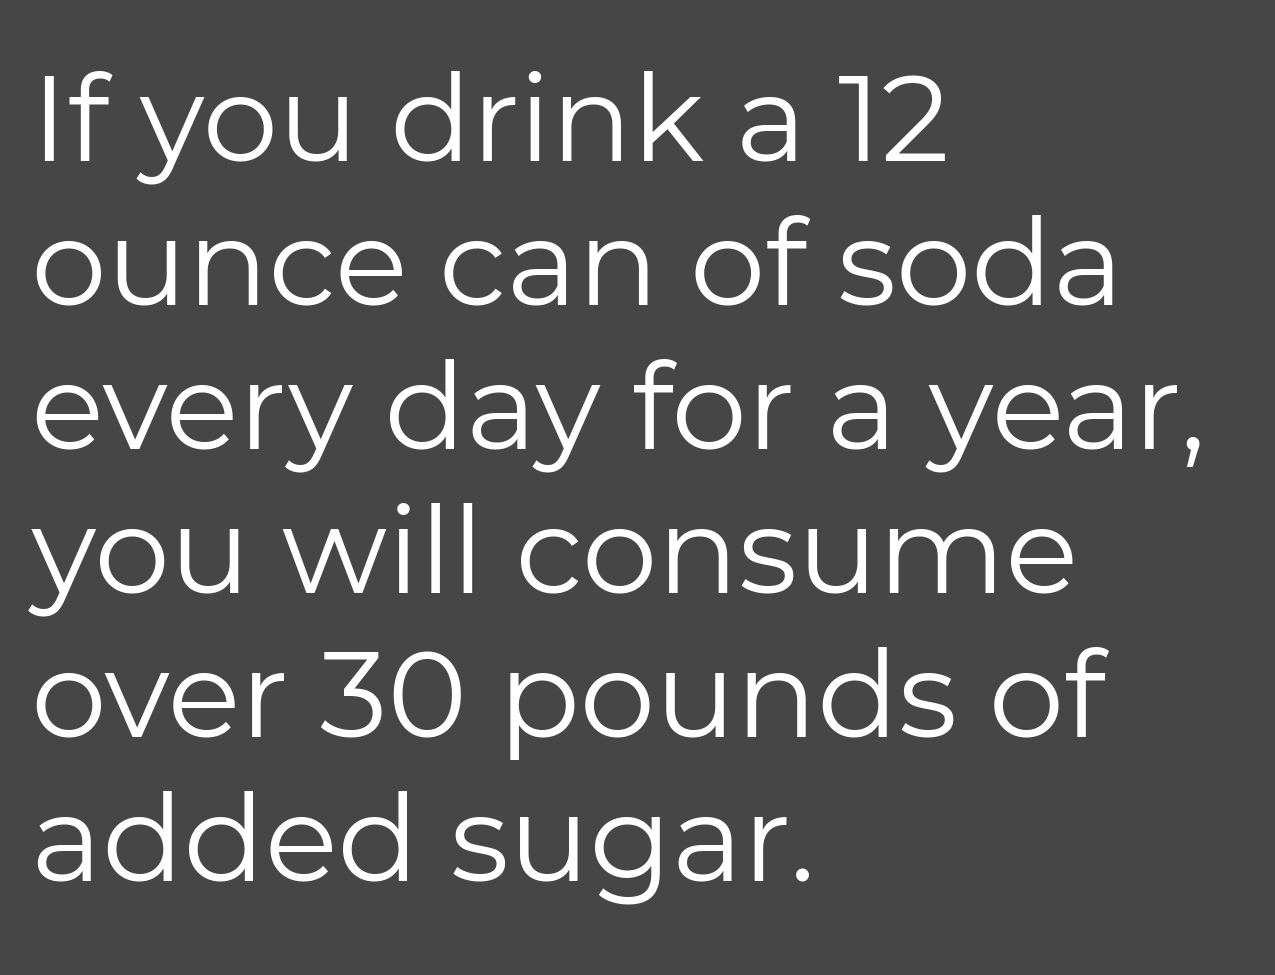 Sugar pounds you can drink